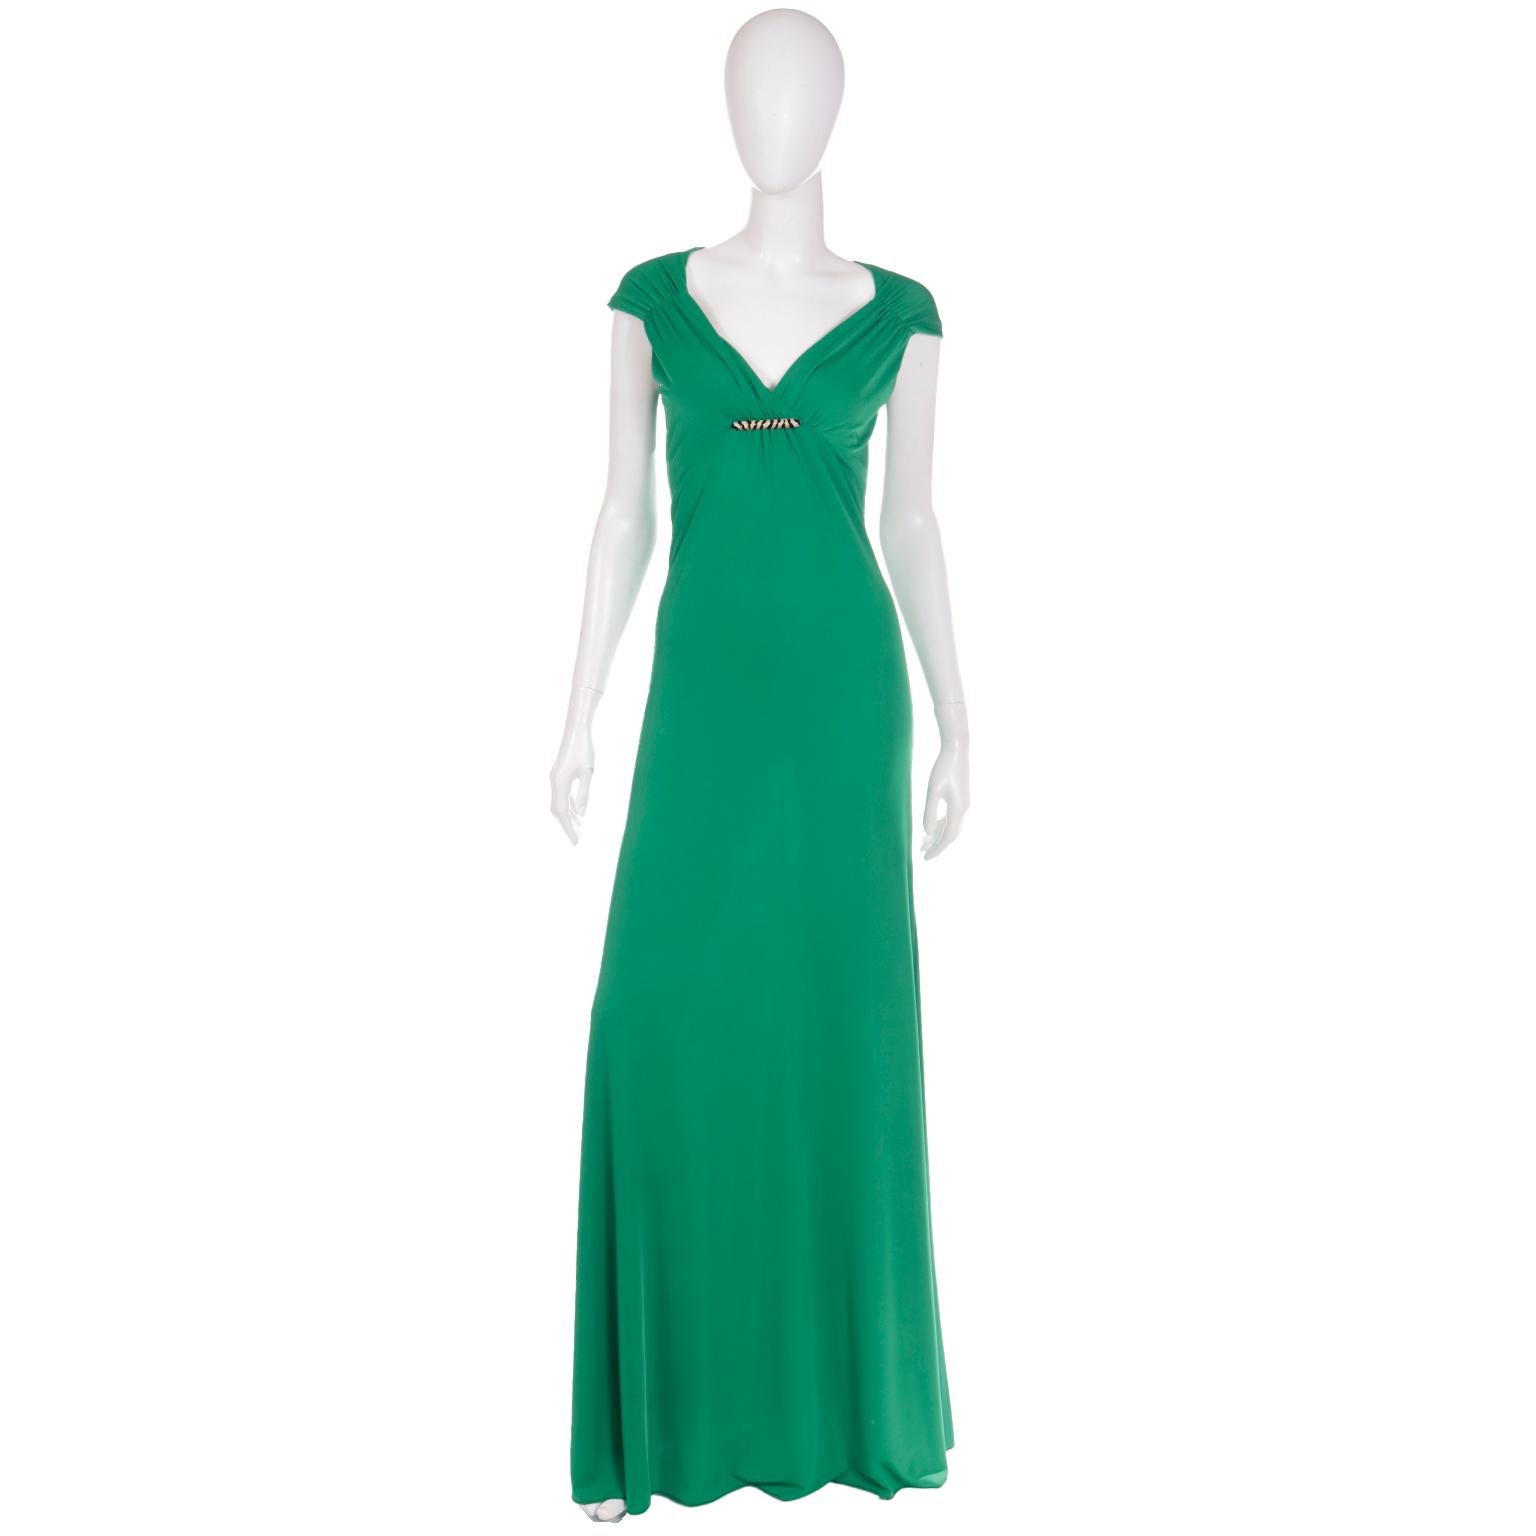 This gorgeous green jersey Roberto Cavalli full length evening dress is deadstock with its original tags and holographic authenticity sticker attached. This lovely dress has an empire waist with gathered shoulders and a low V gathered front,